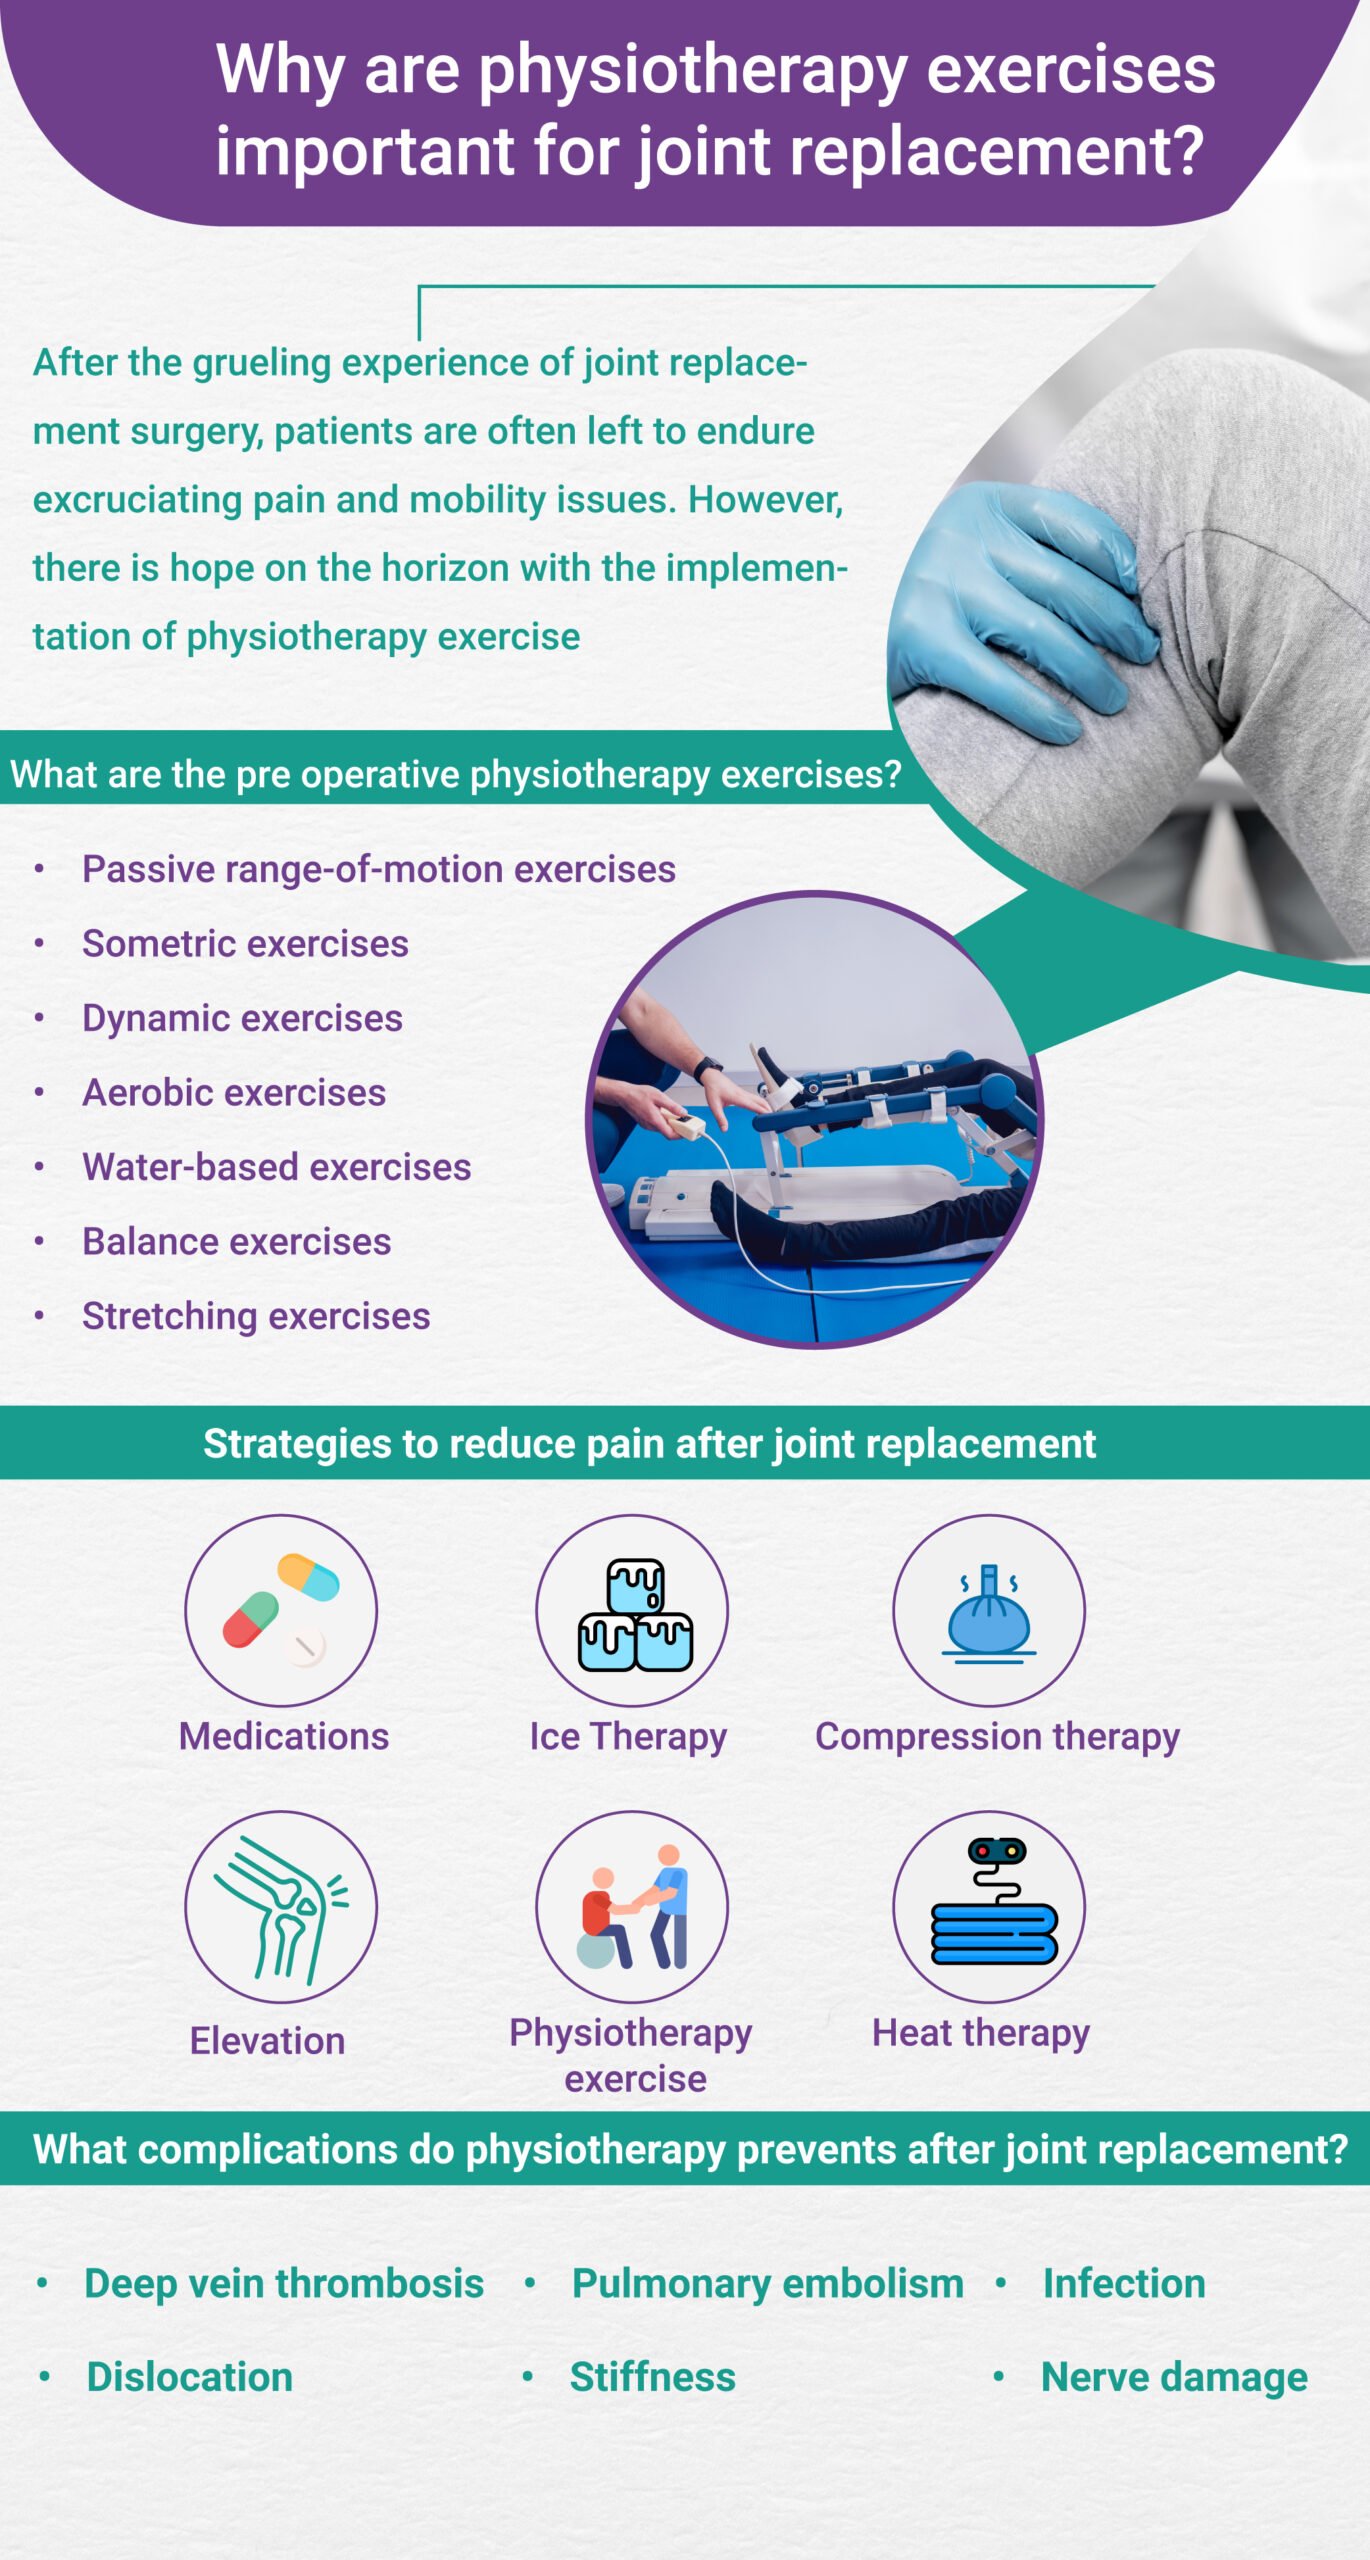 Physiotherapy exercises important for joint replacement